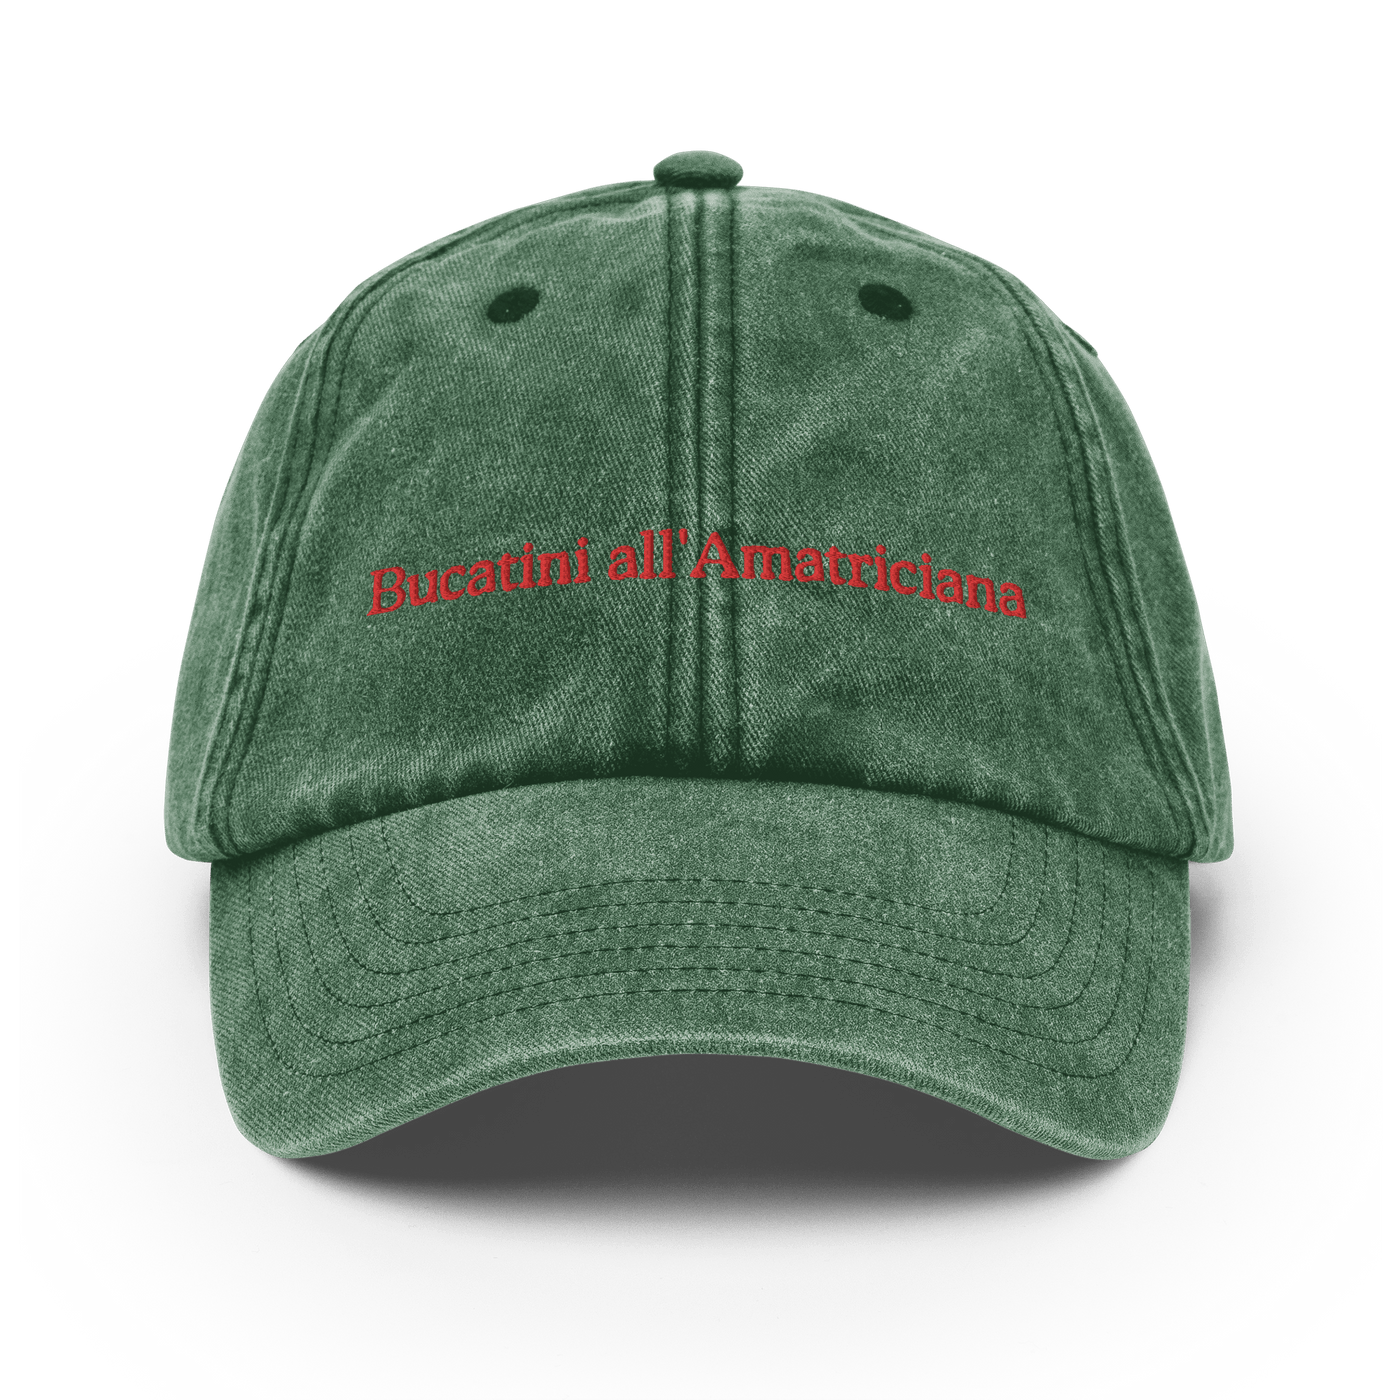 Bucatini all'Amatriciana HatVintage Hat - Vintage Bottle Green - - Just Another Cap Store